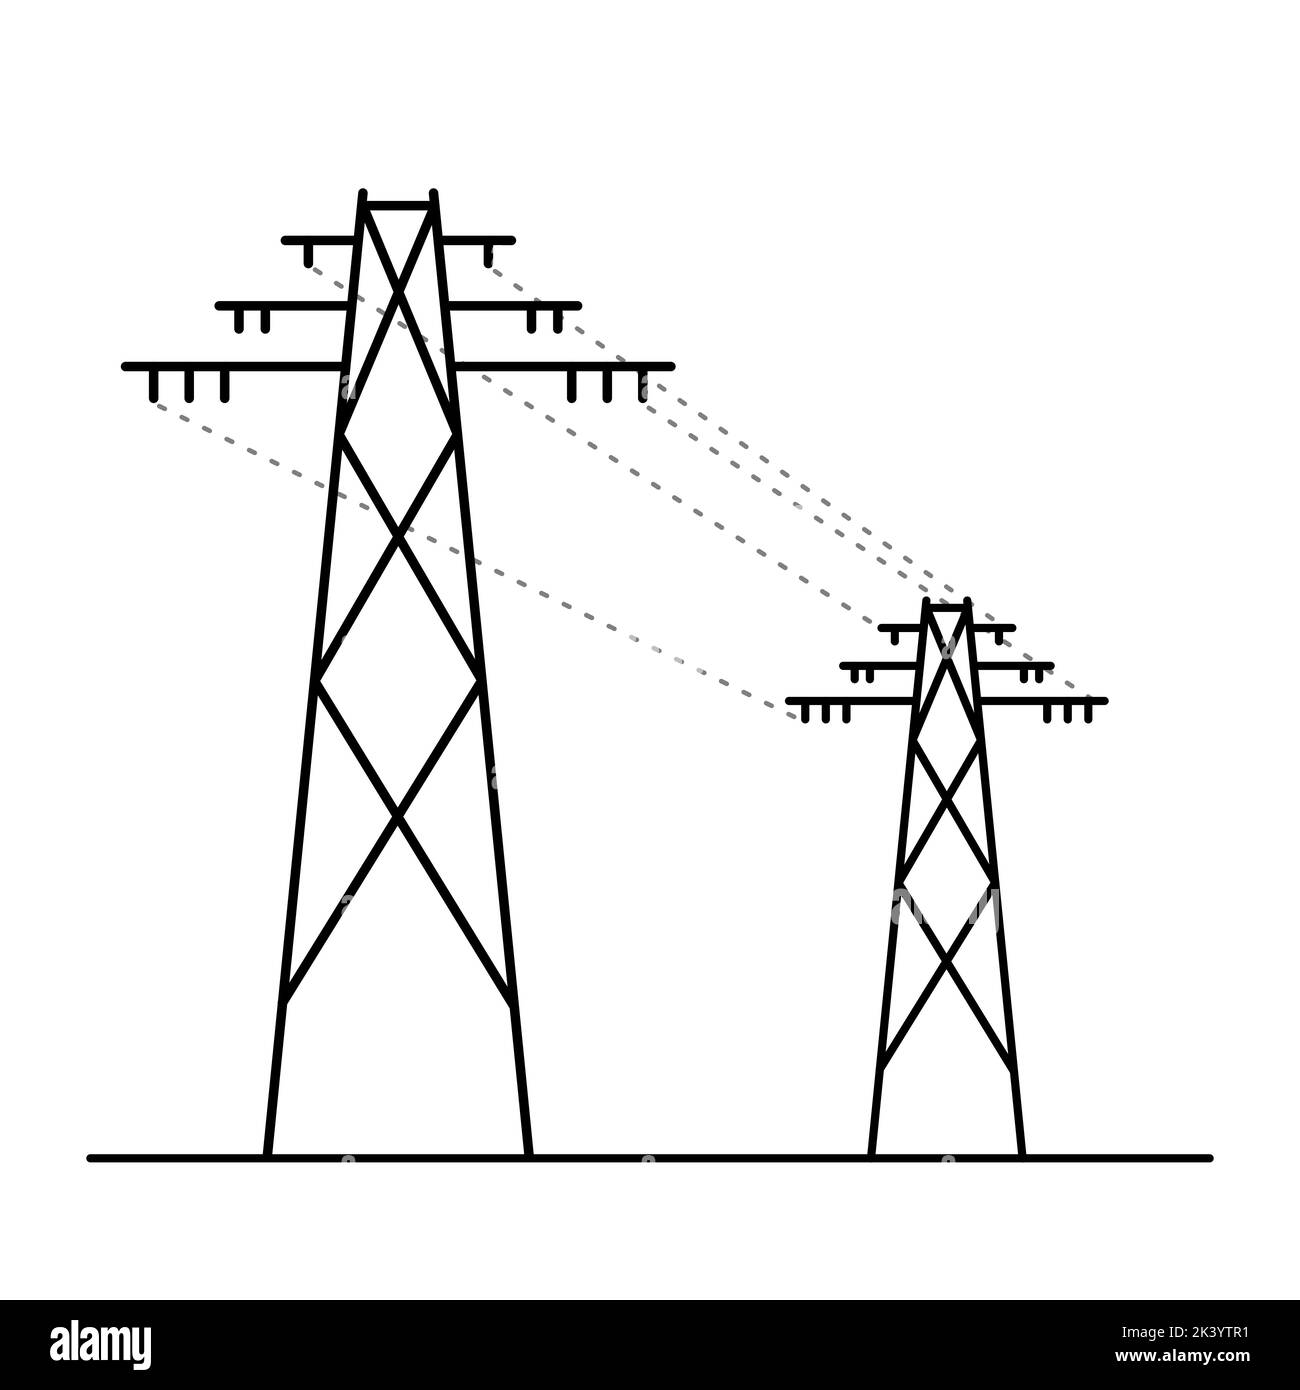 Power tower line art. Two high voltage poles. Stock Vector